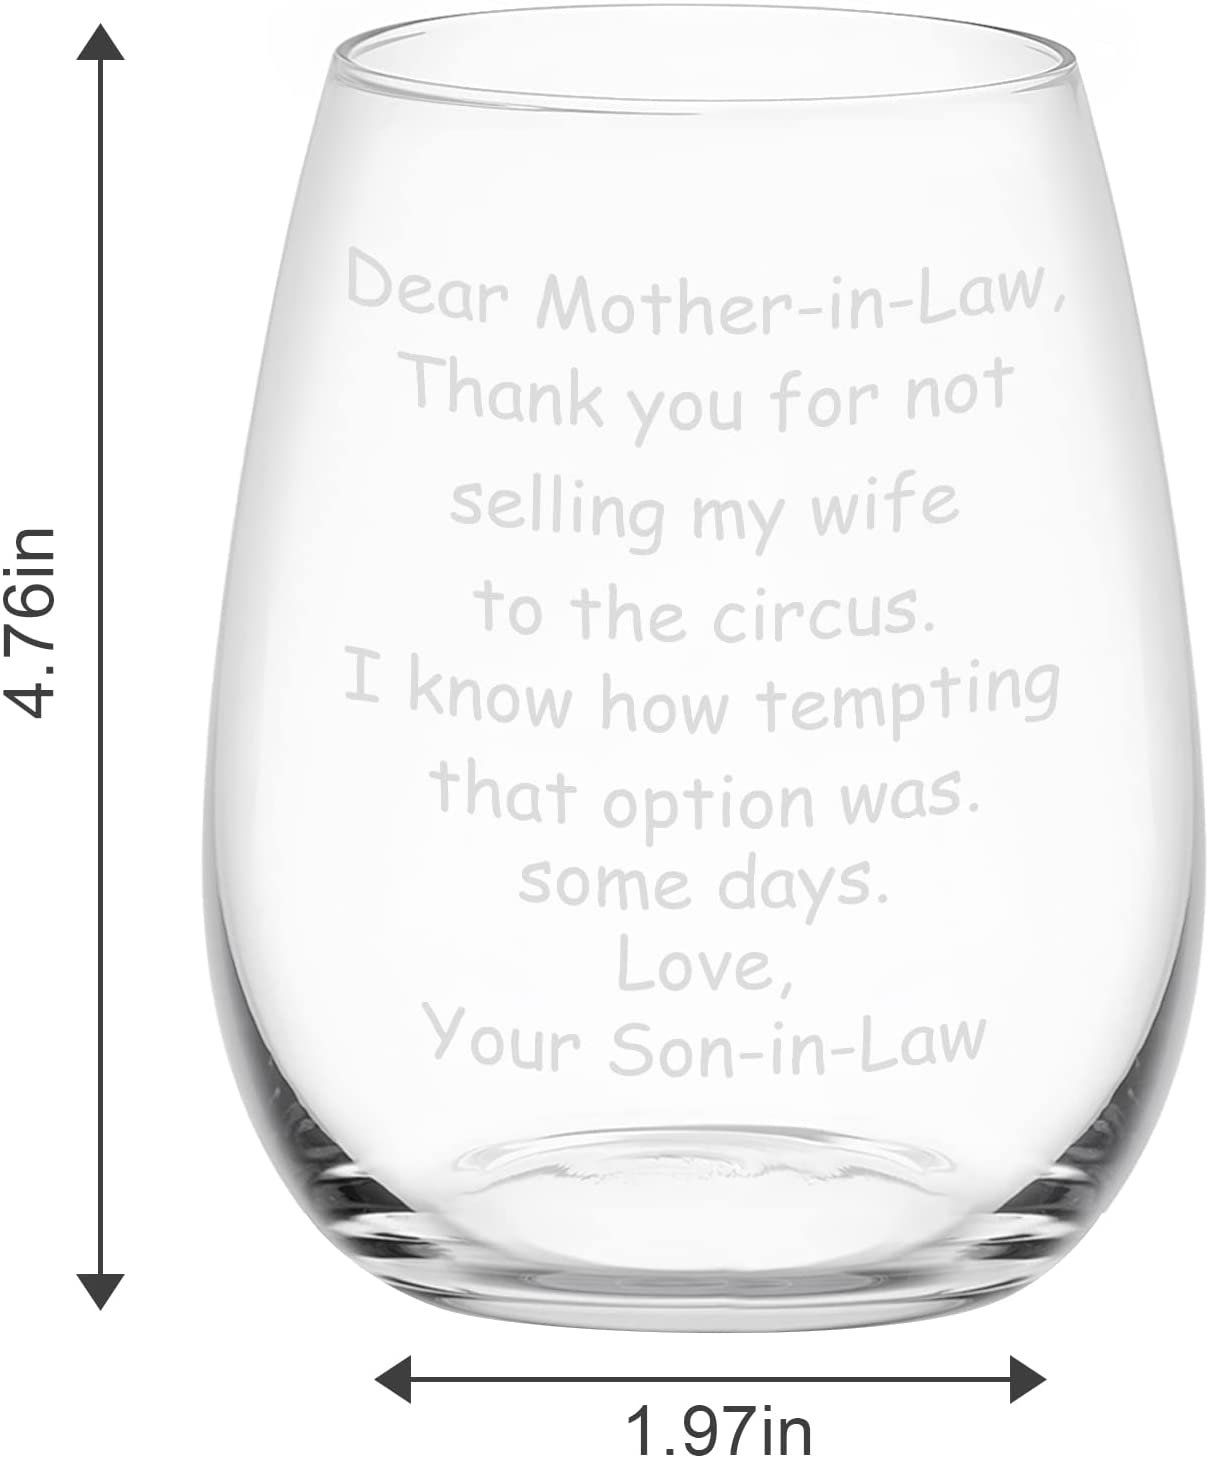 DAZLUTE Mother in Law Gifts, 15Oz Mother in Law Wine Glass, Funny Mother’S Day Gifts, Birthday Gifts, Wedding or Christmas Gifts Idea for Mother in Law from Son in Law